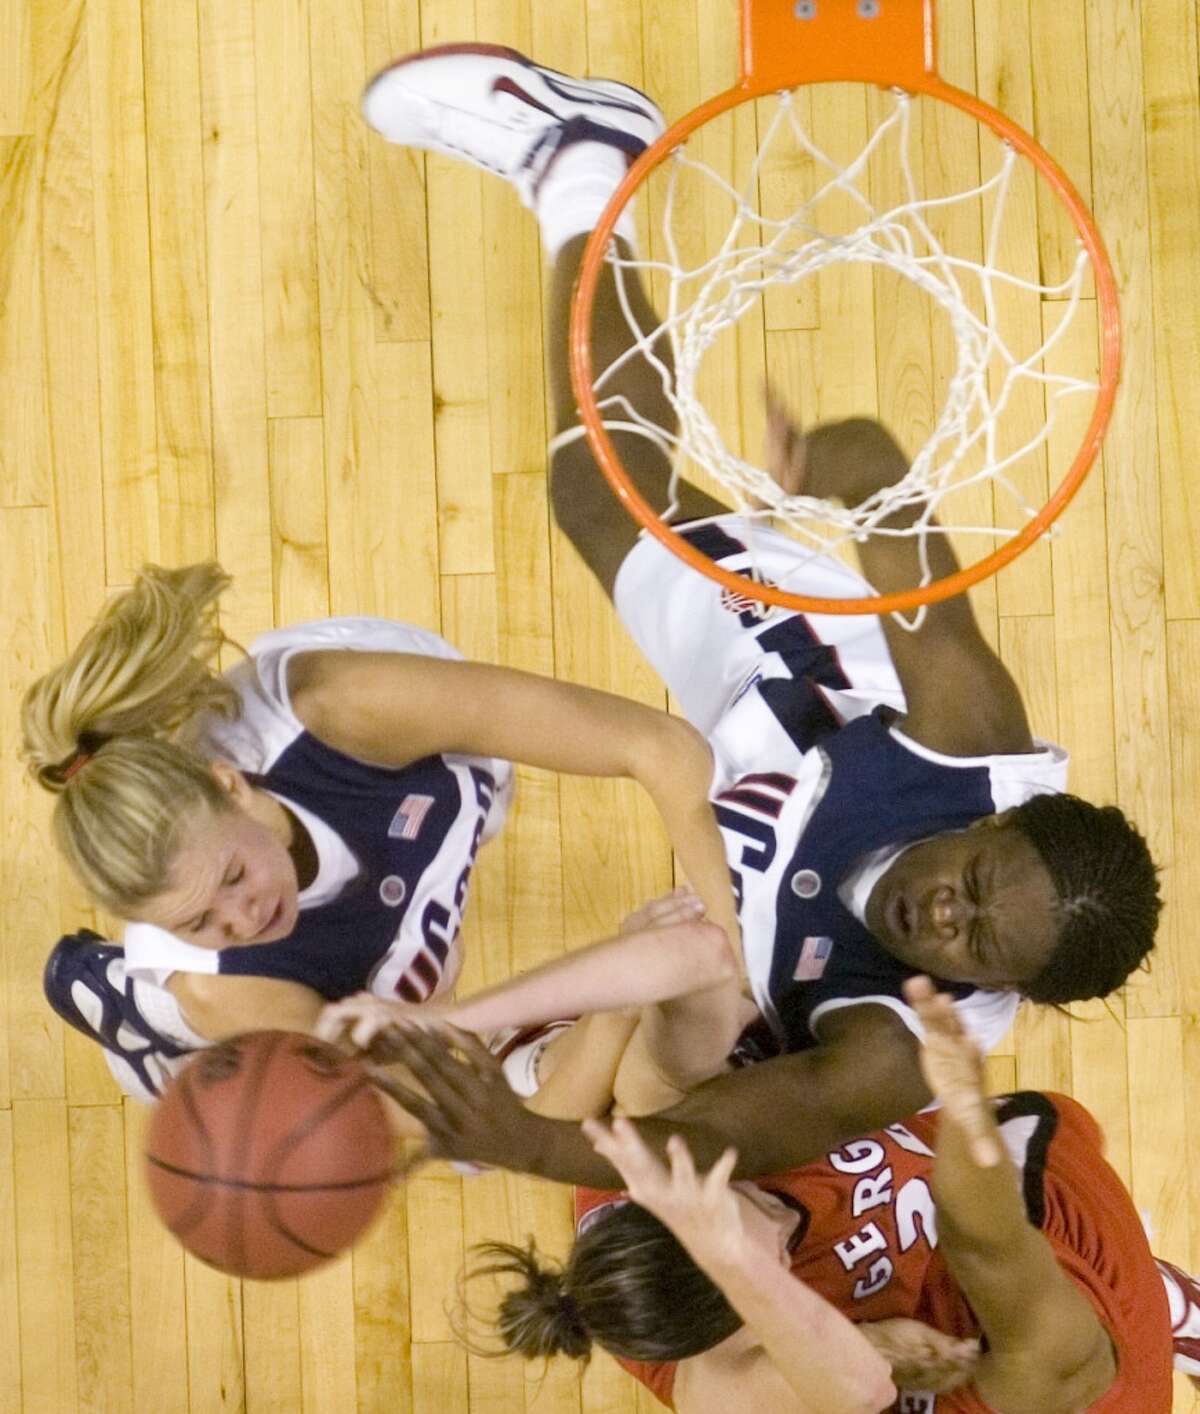 Bridgeport_032606_ Connecticut's Ann Strother, left, Georgia's Megan Darrah, bottom, and Connecticut's Barbara Turner, right, go after a rebound during the 2006 NCAA Tournament Bridgeport Regional basketball tournament at the Arena at Harbor Yard in Bridgeport, Conn. on Sunday, March 26, 2006. Chris Preovolos/Stamford Advocate